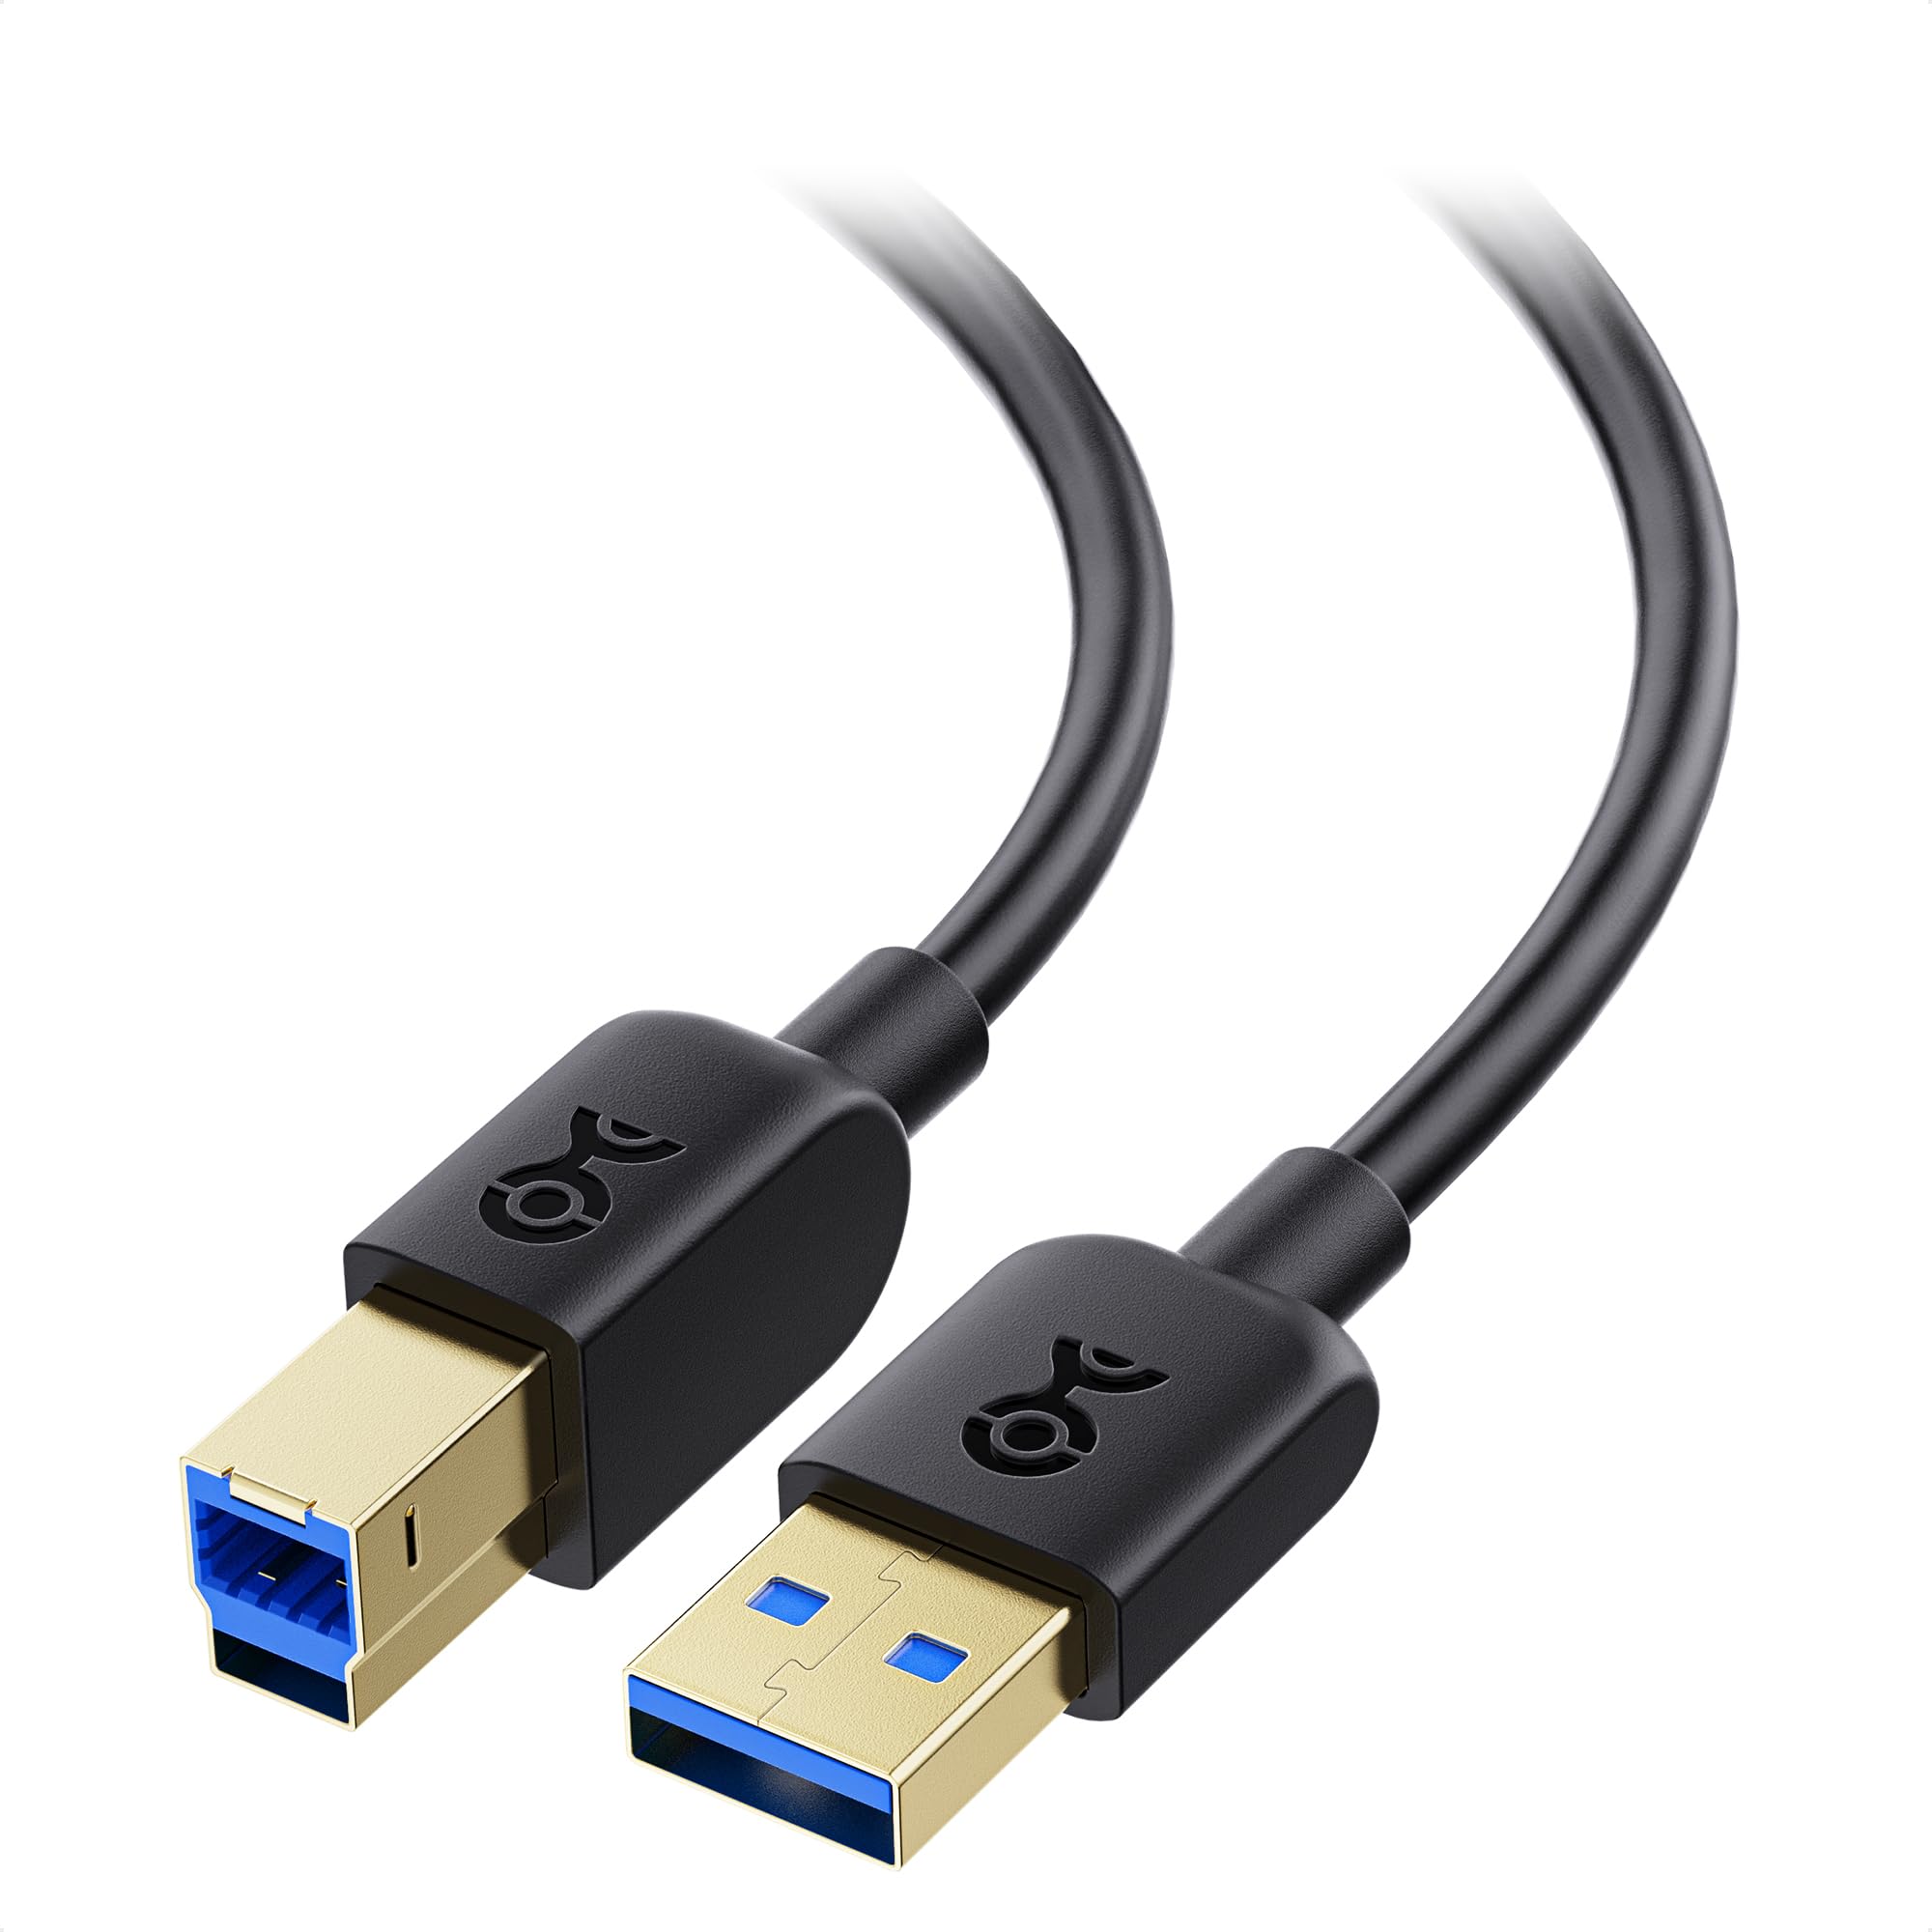 USB 3.0 cable plugged into a computer port